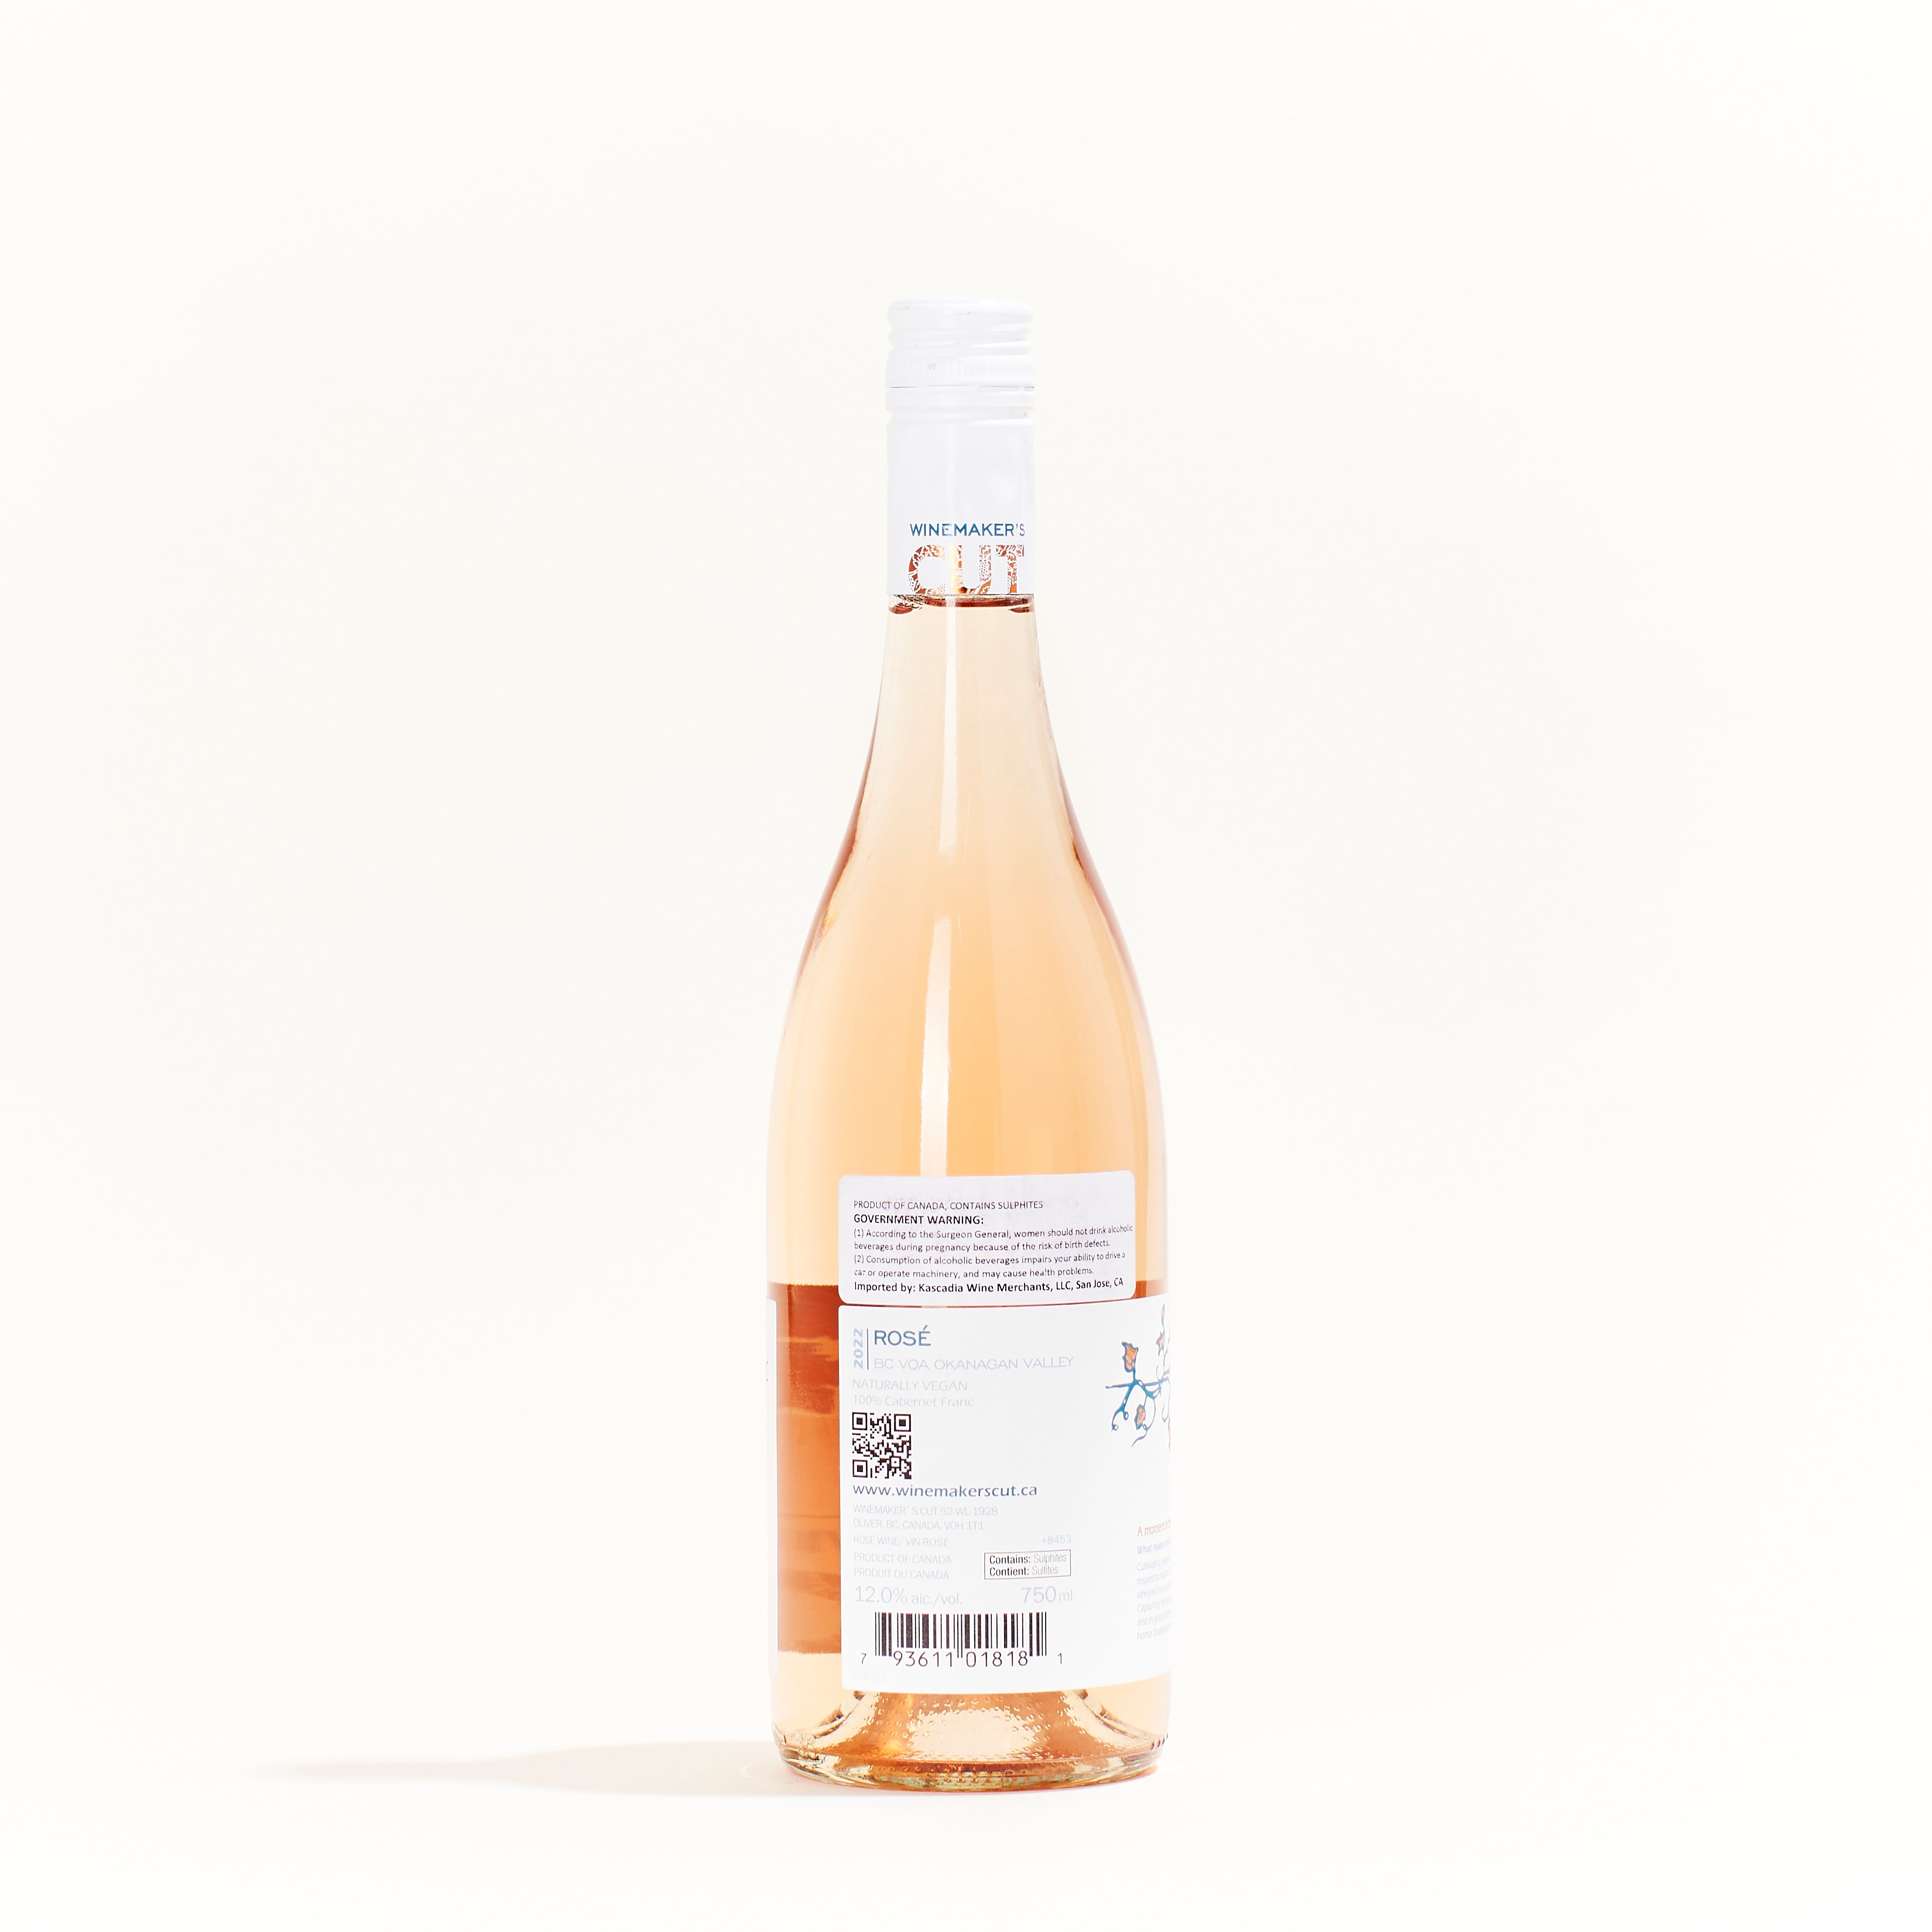 Okanagan Valley Rosé, by Winemaker&#39;s CUT, made from Cabernet Franc is a natural Rosé Wine from Okanagan Valley, Canada.